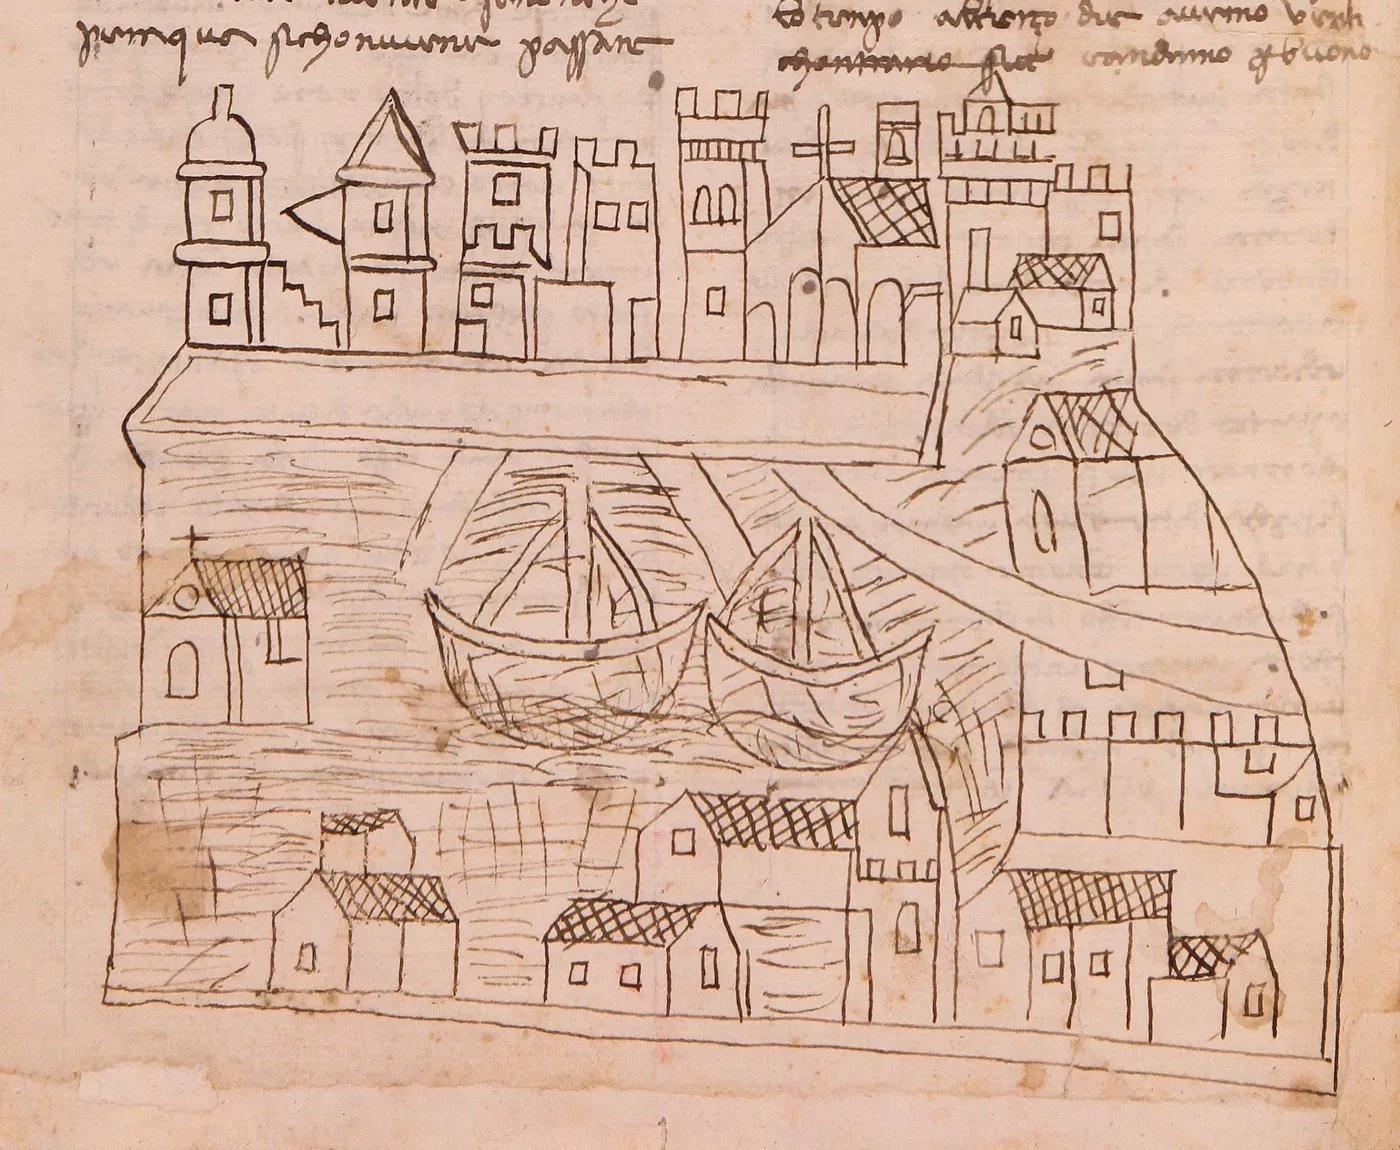 Drawing of Venice from c. 1350